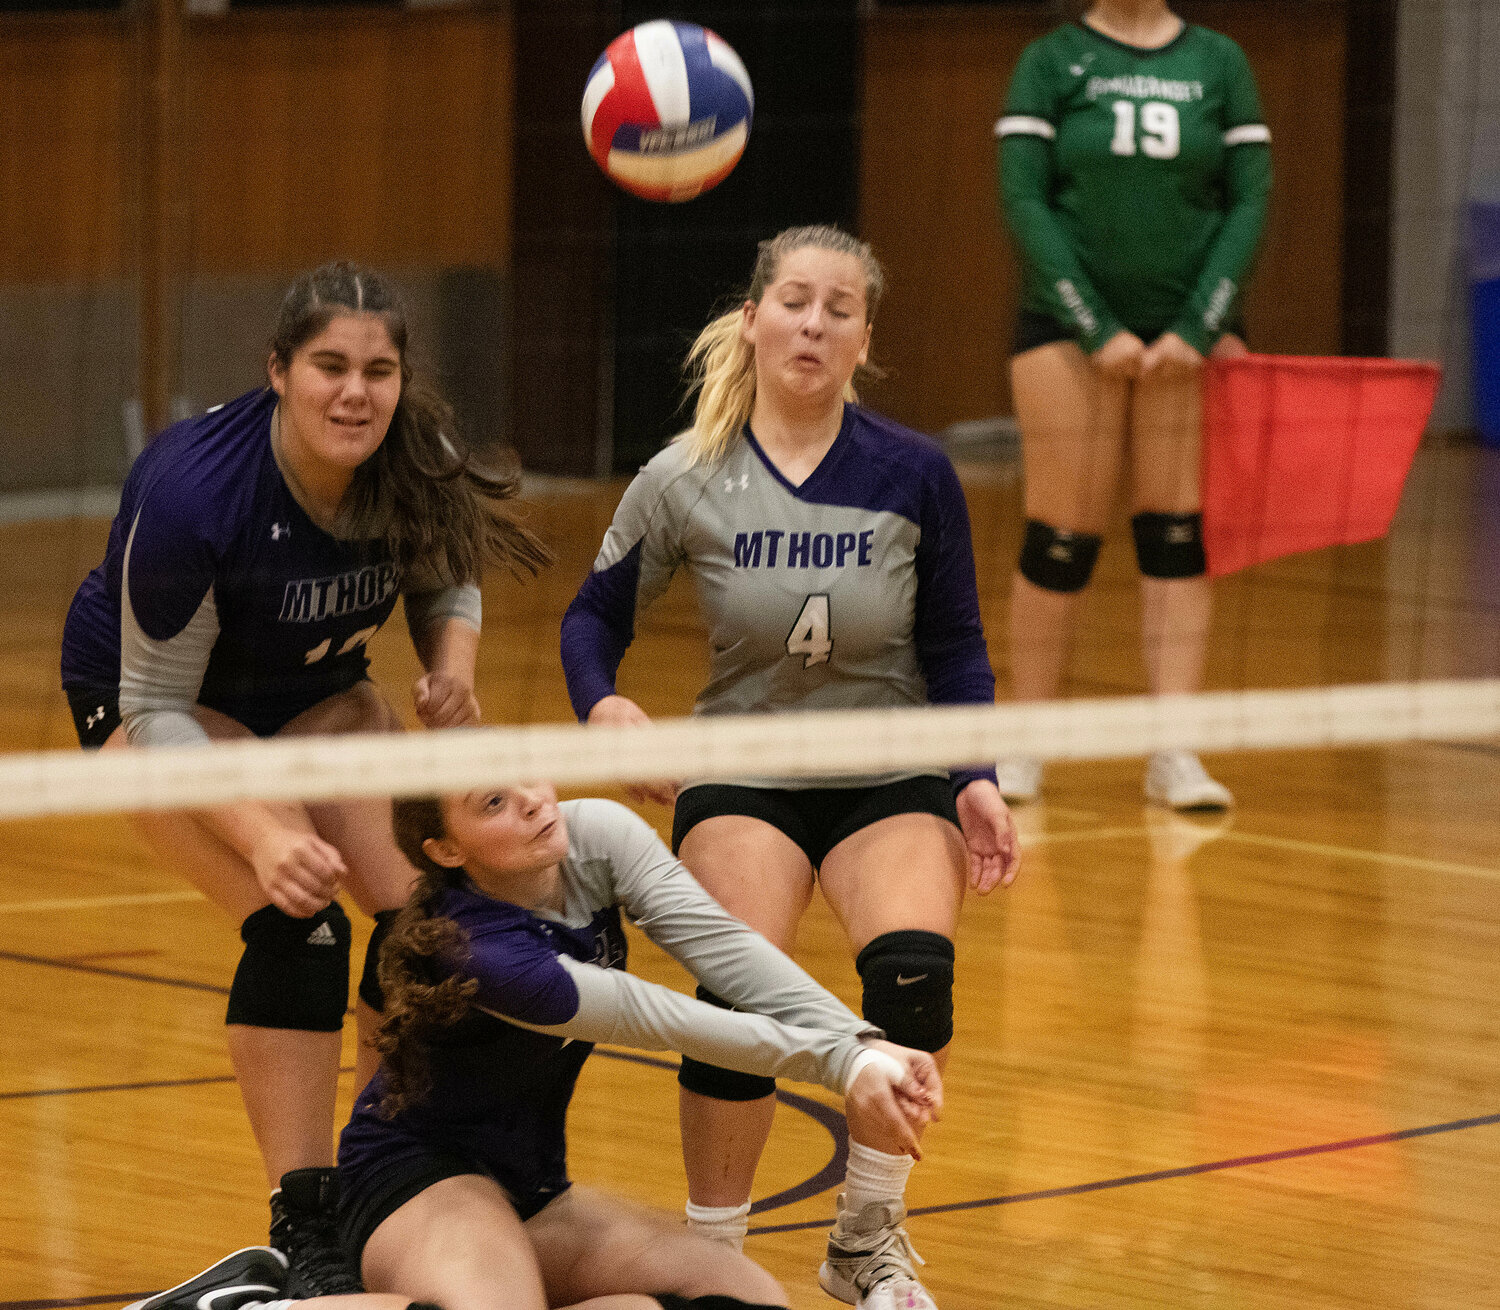 Leah Marshall (left) looks on as Savannah Murray volleys the ball from her knees, with Mia Hanson (right).